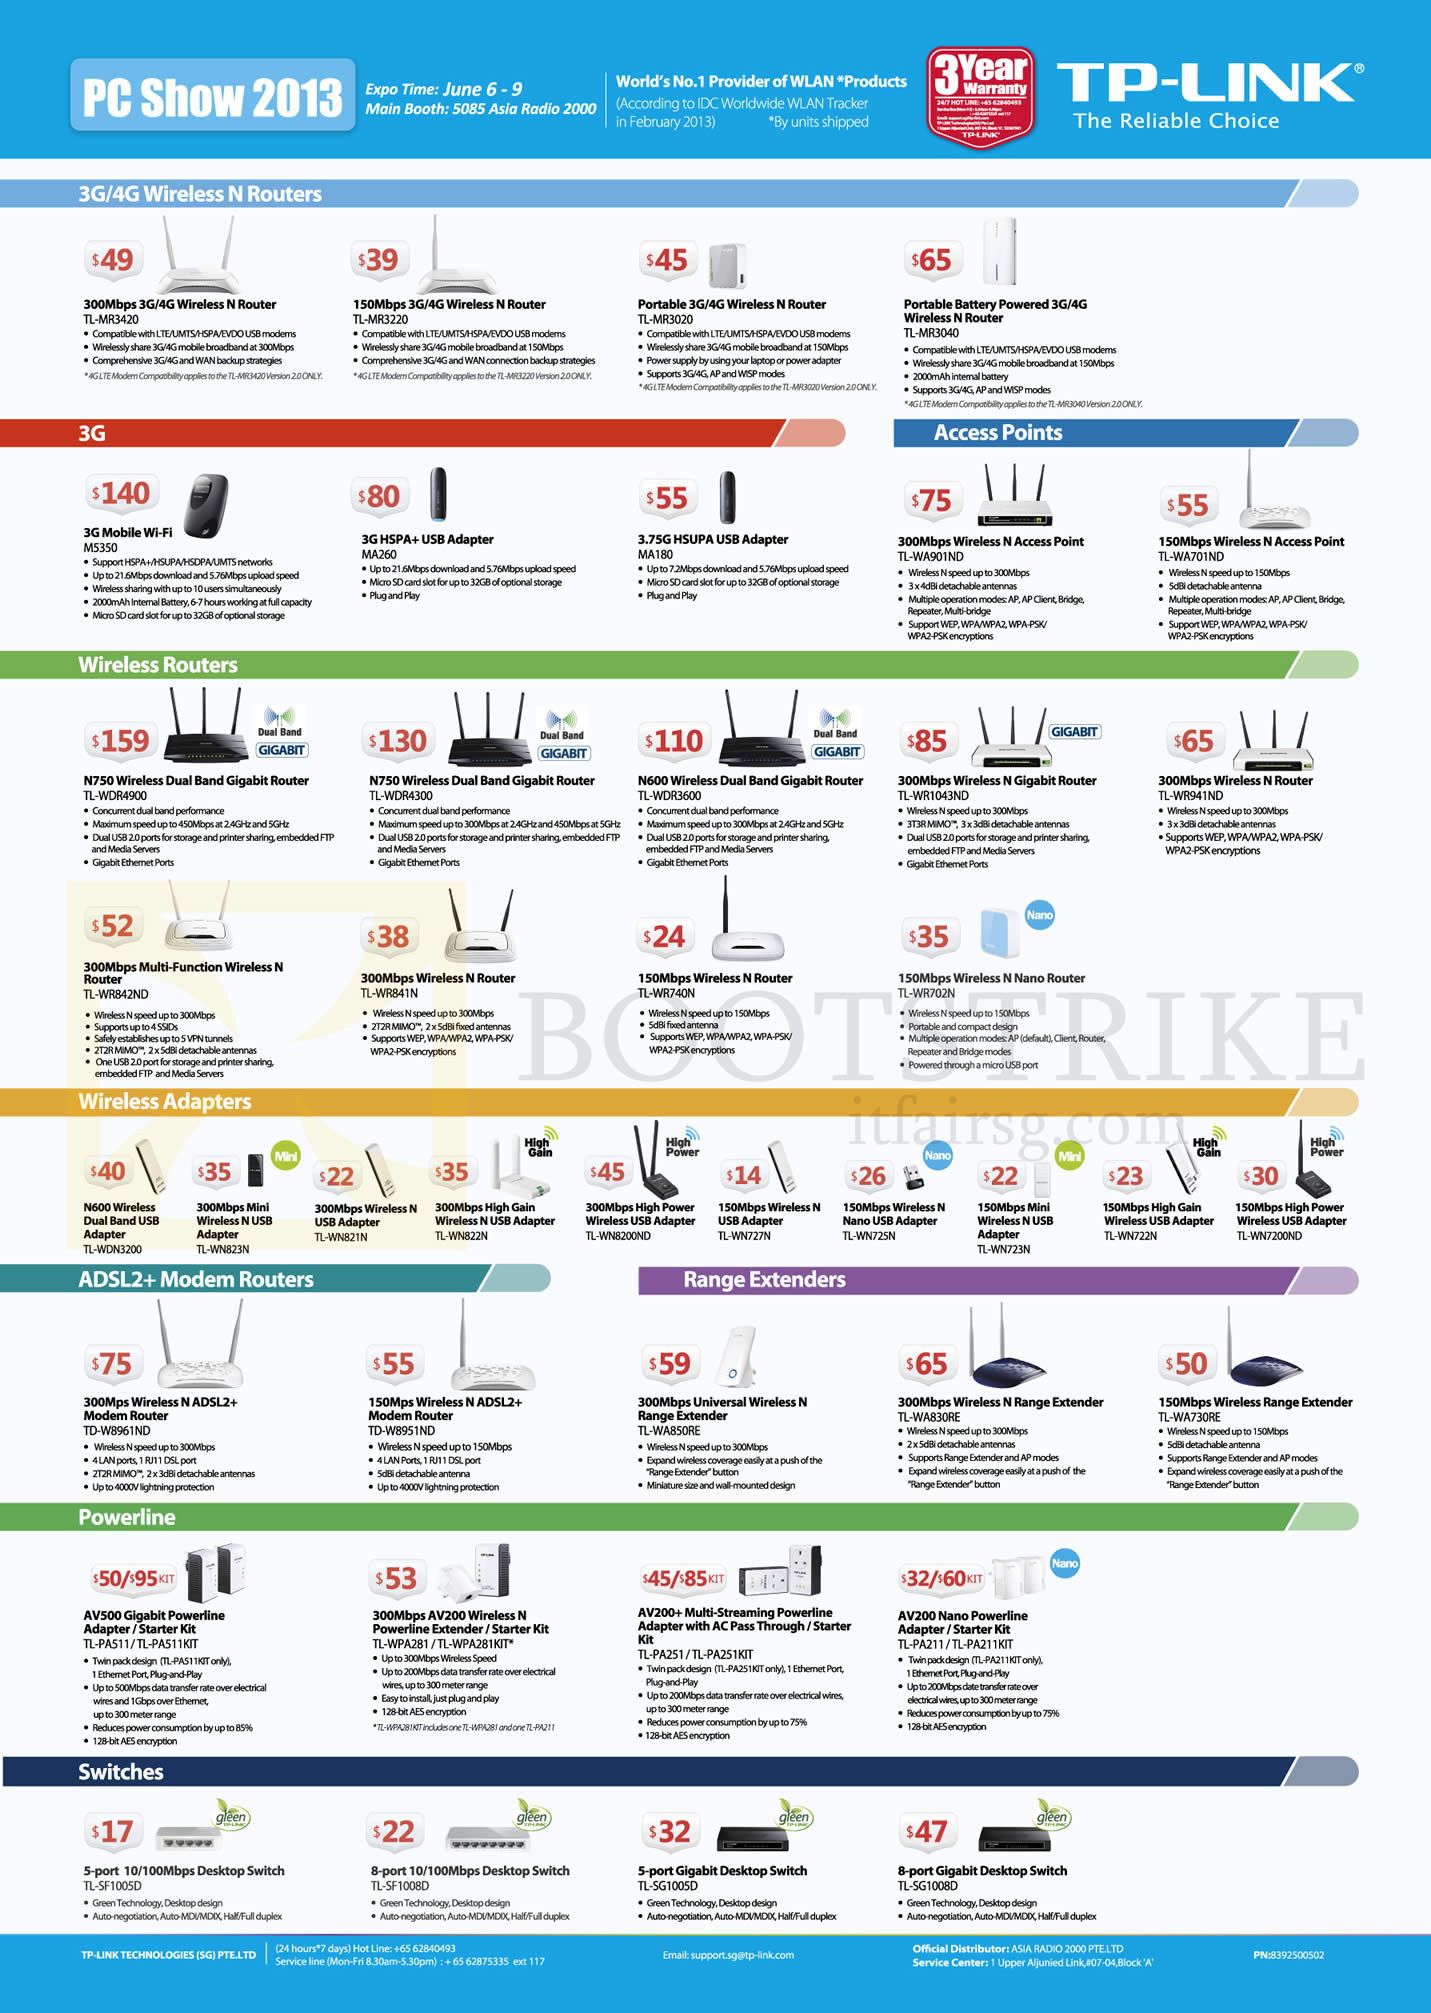 PC SHOW 2013 price list image brochure of Asia Radio TP-Link Networking 3G 4G Wireless Routers, USB Adapters, Modems, Access Points, ADSL2, Range Extenders, Powerline, Switches